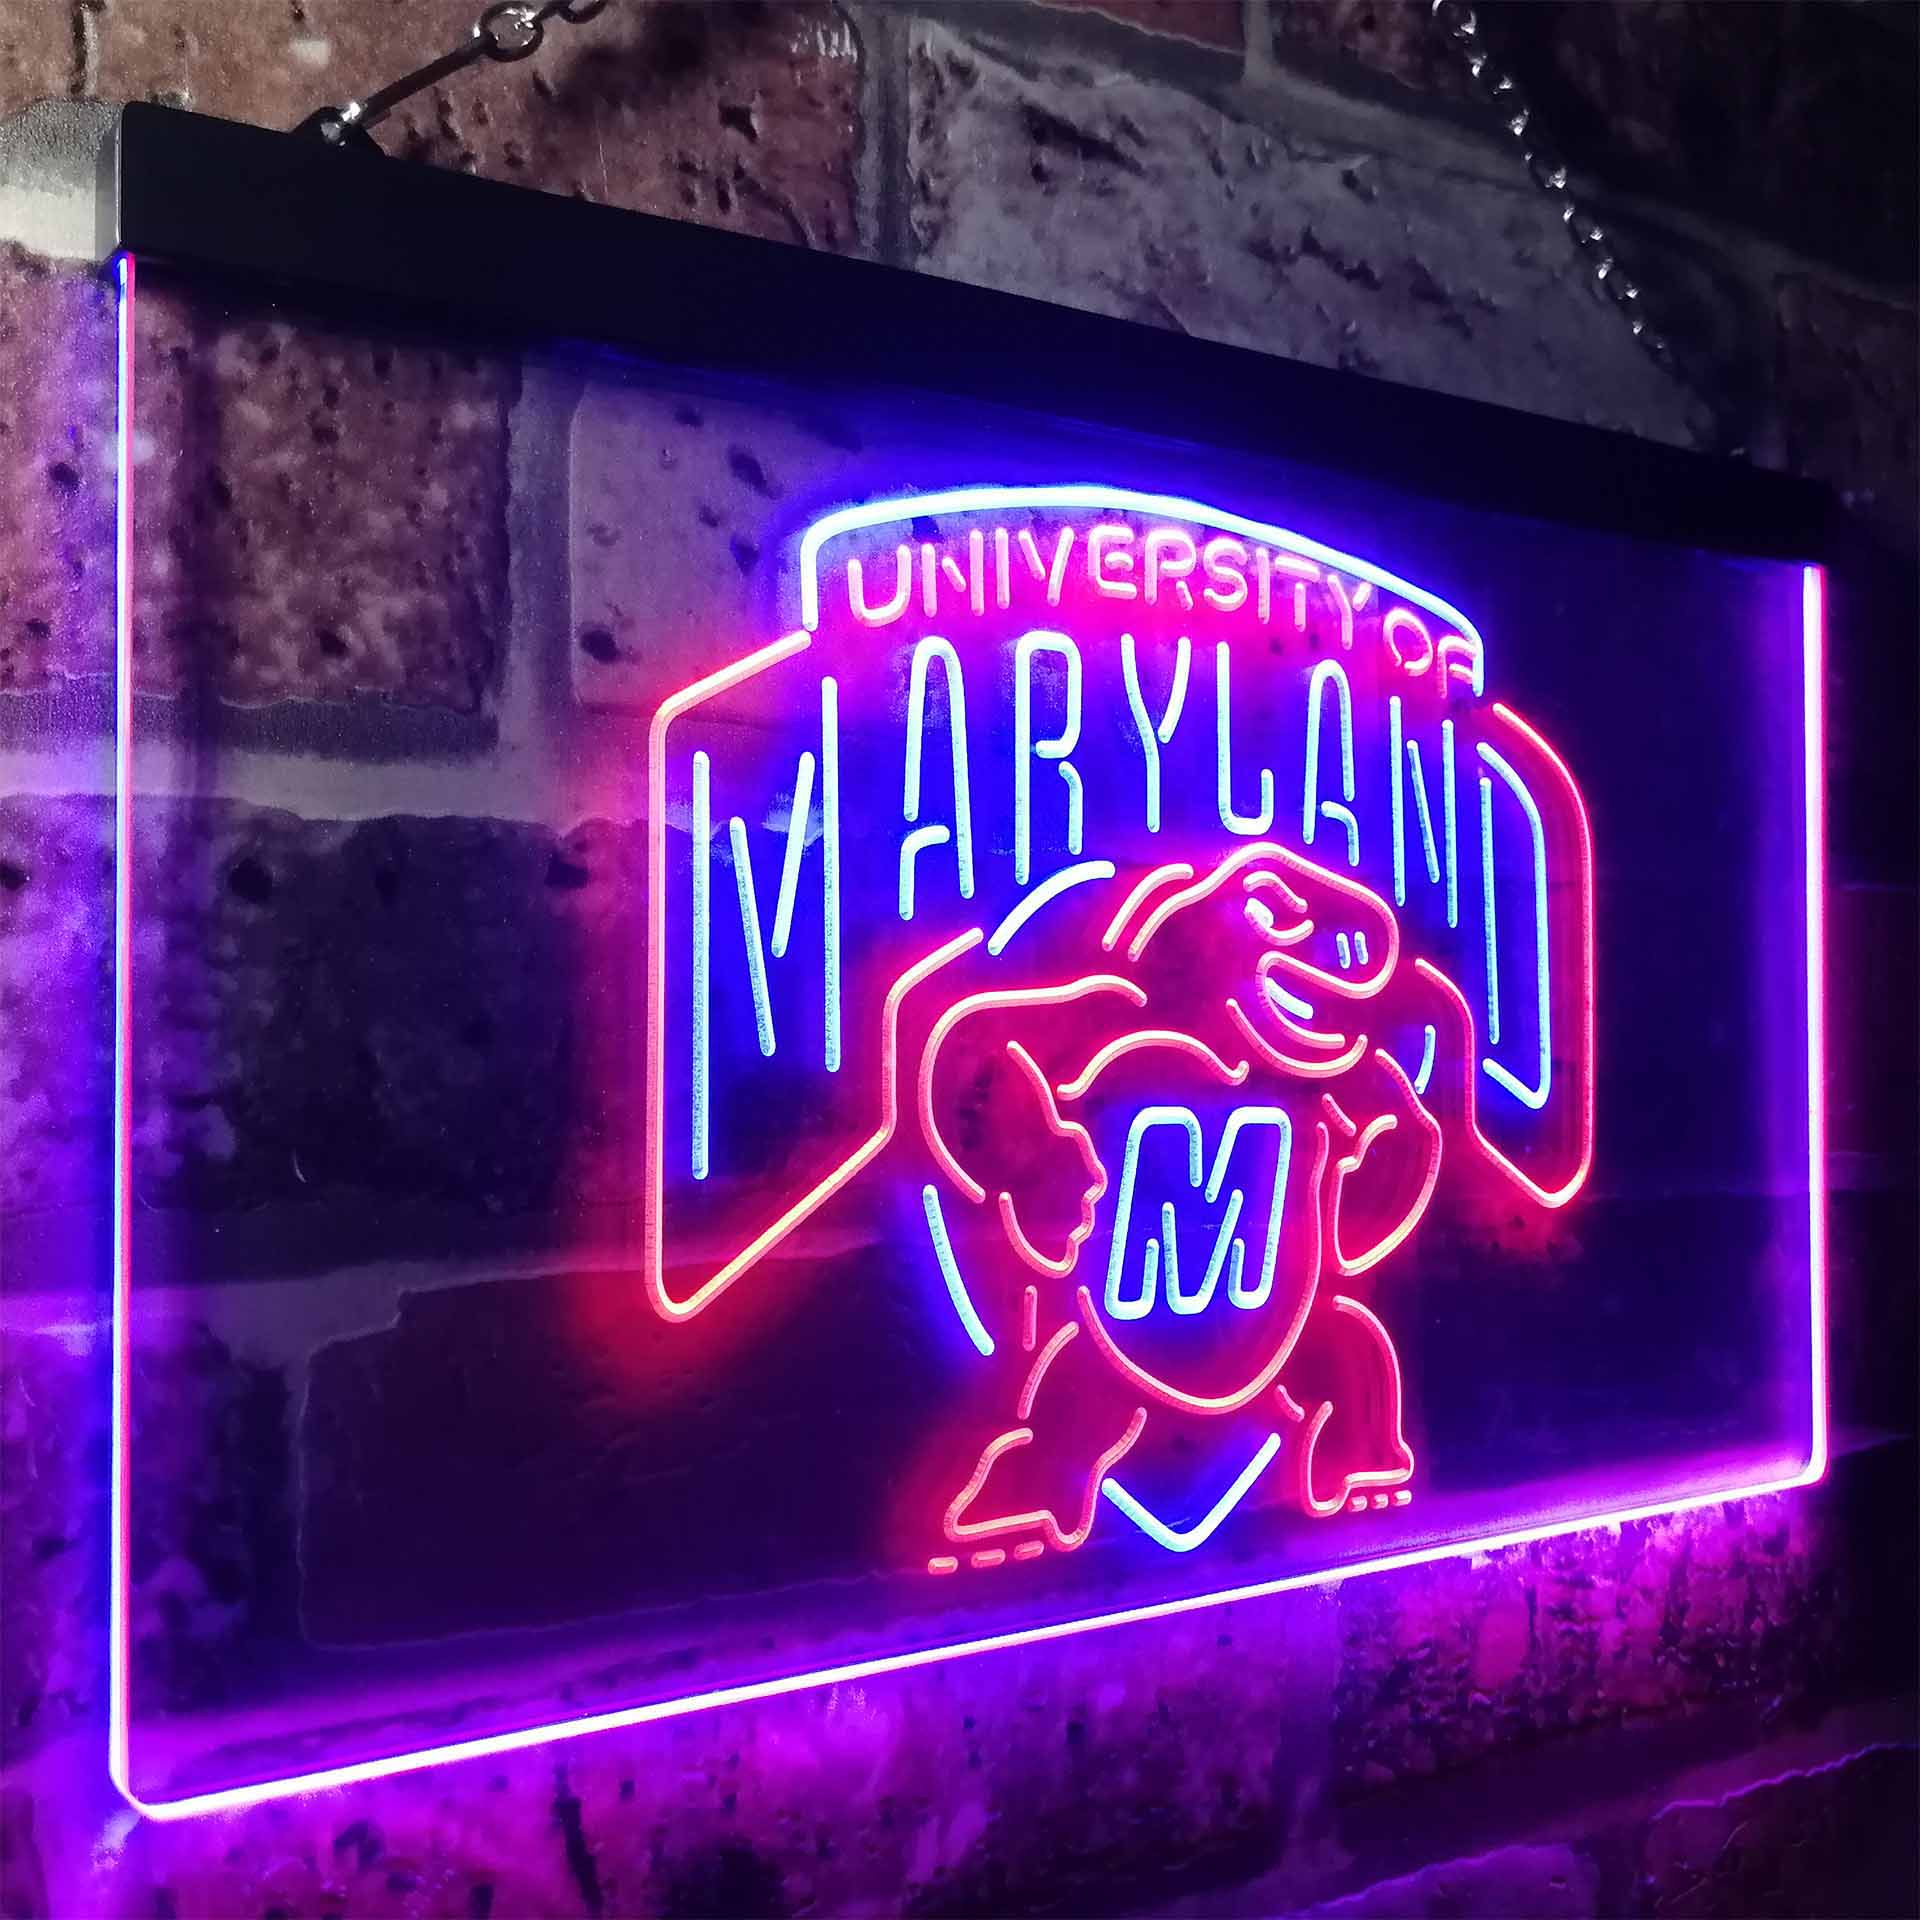 University Of Maryland Club Terrapinses Neon Light Up Sign Wall Decor